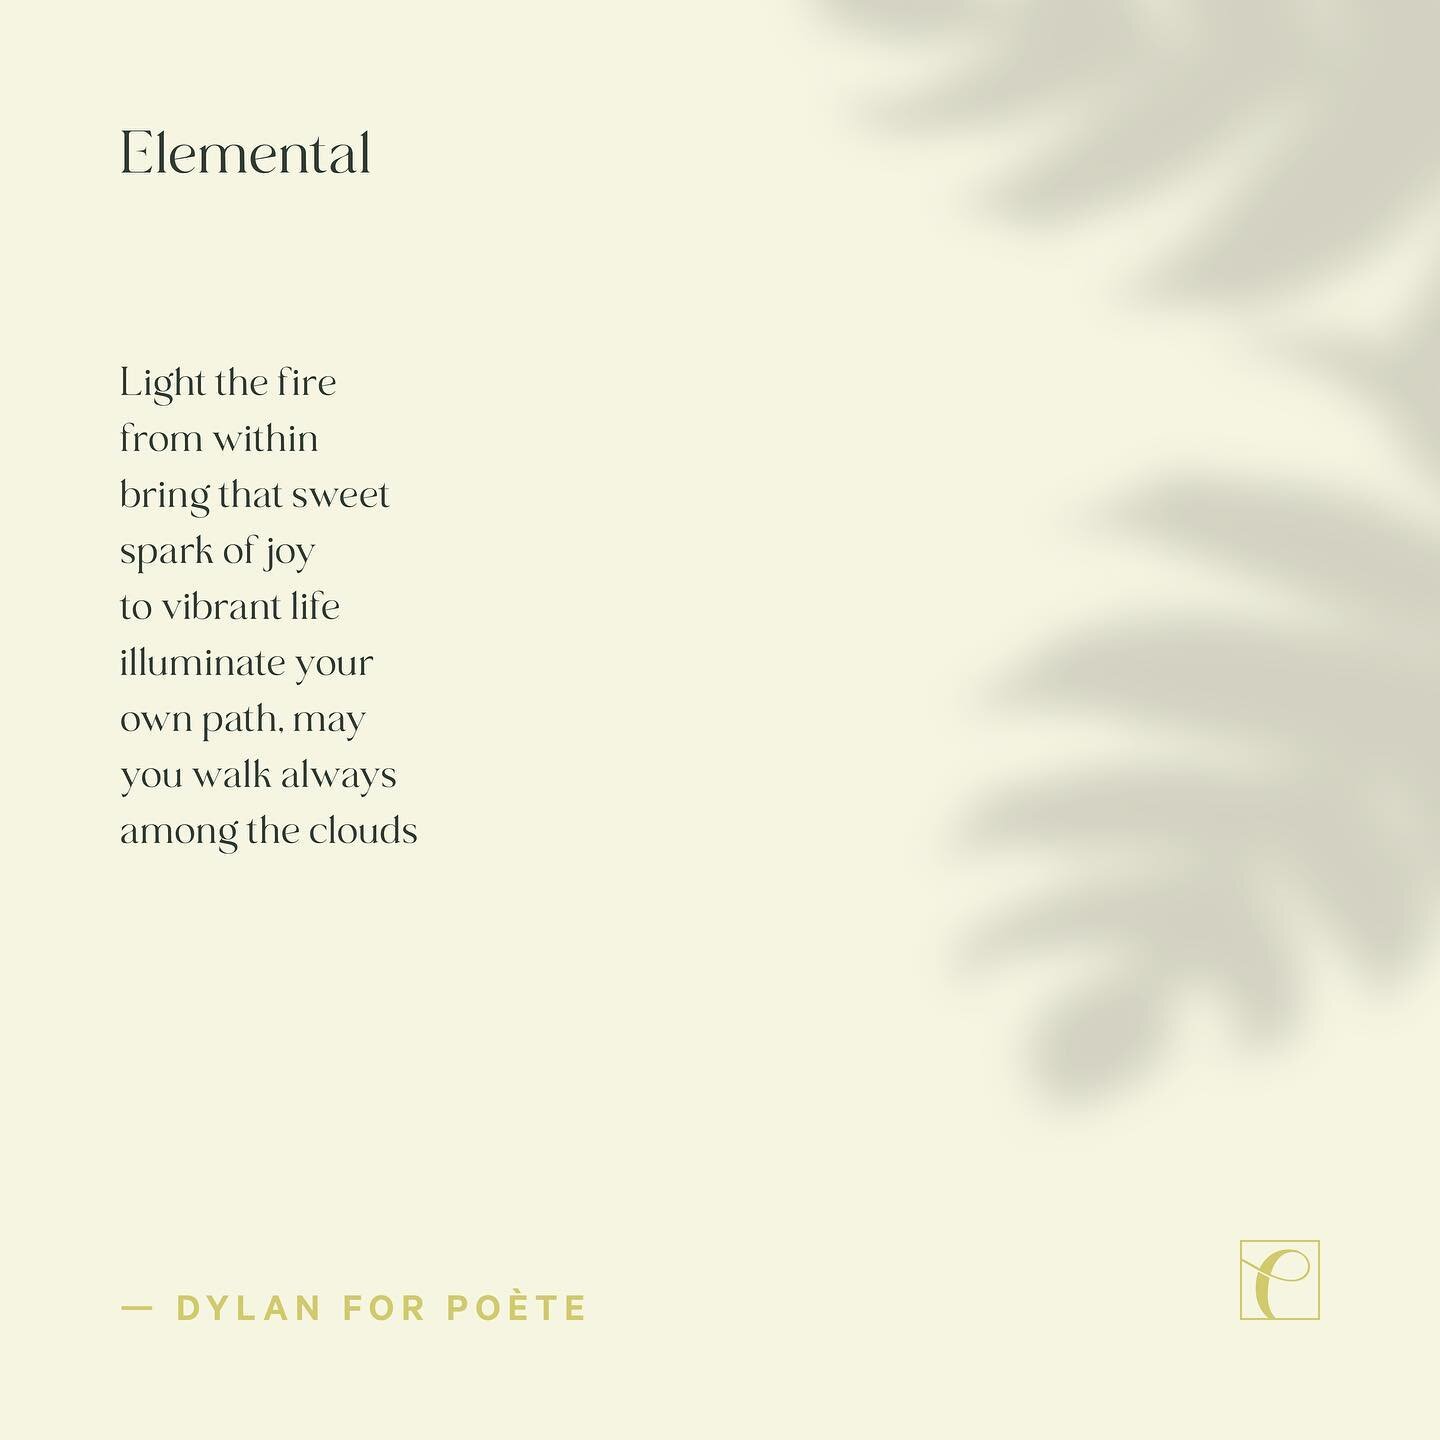 What lights your fire within? 💛 
.
.
.
#poetryofsimplethings #naturelovers #scentlovers #poetry #po&egrave;te #poetsofinstagram #mindfulmoments #sparkjoy #elemental